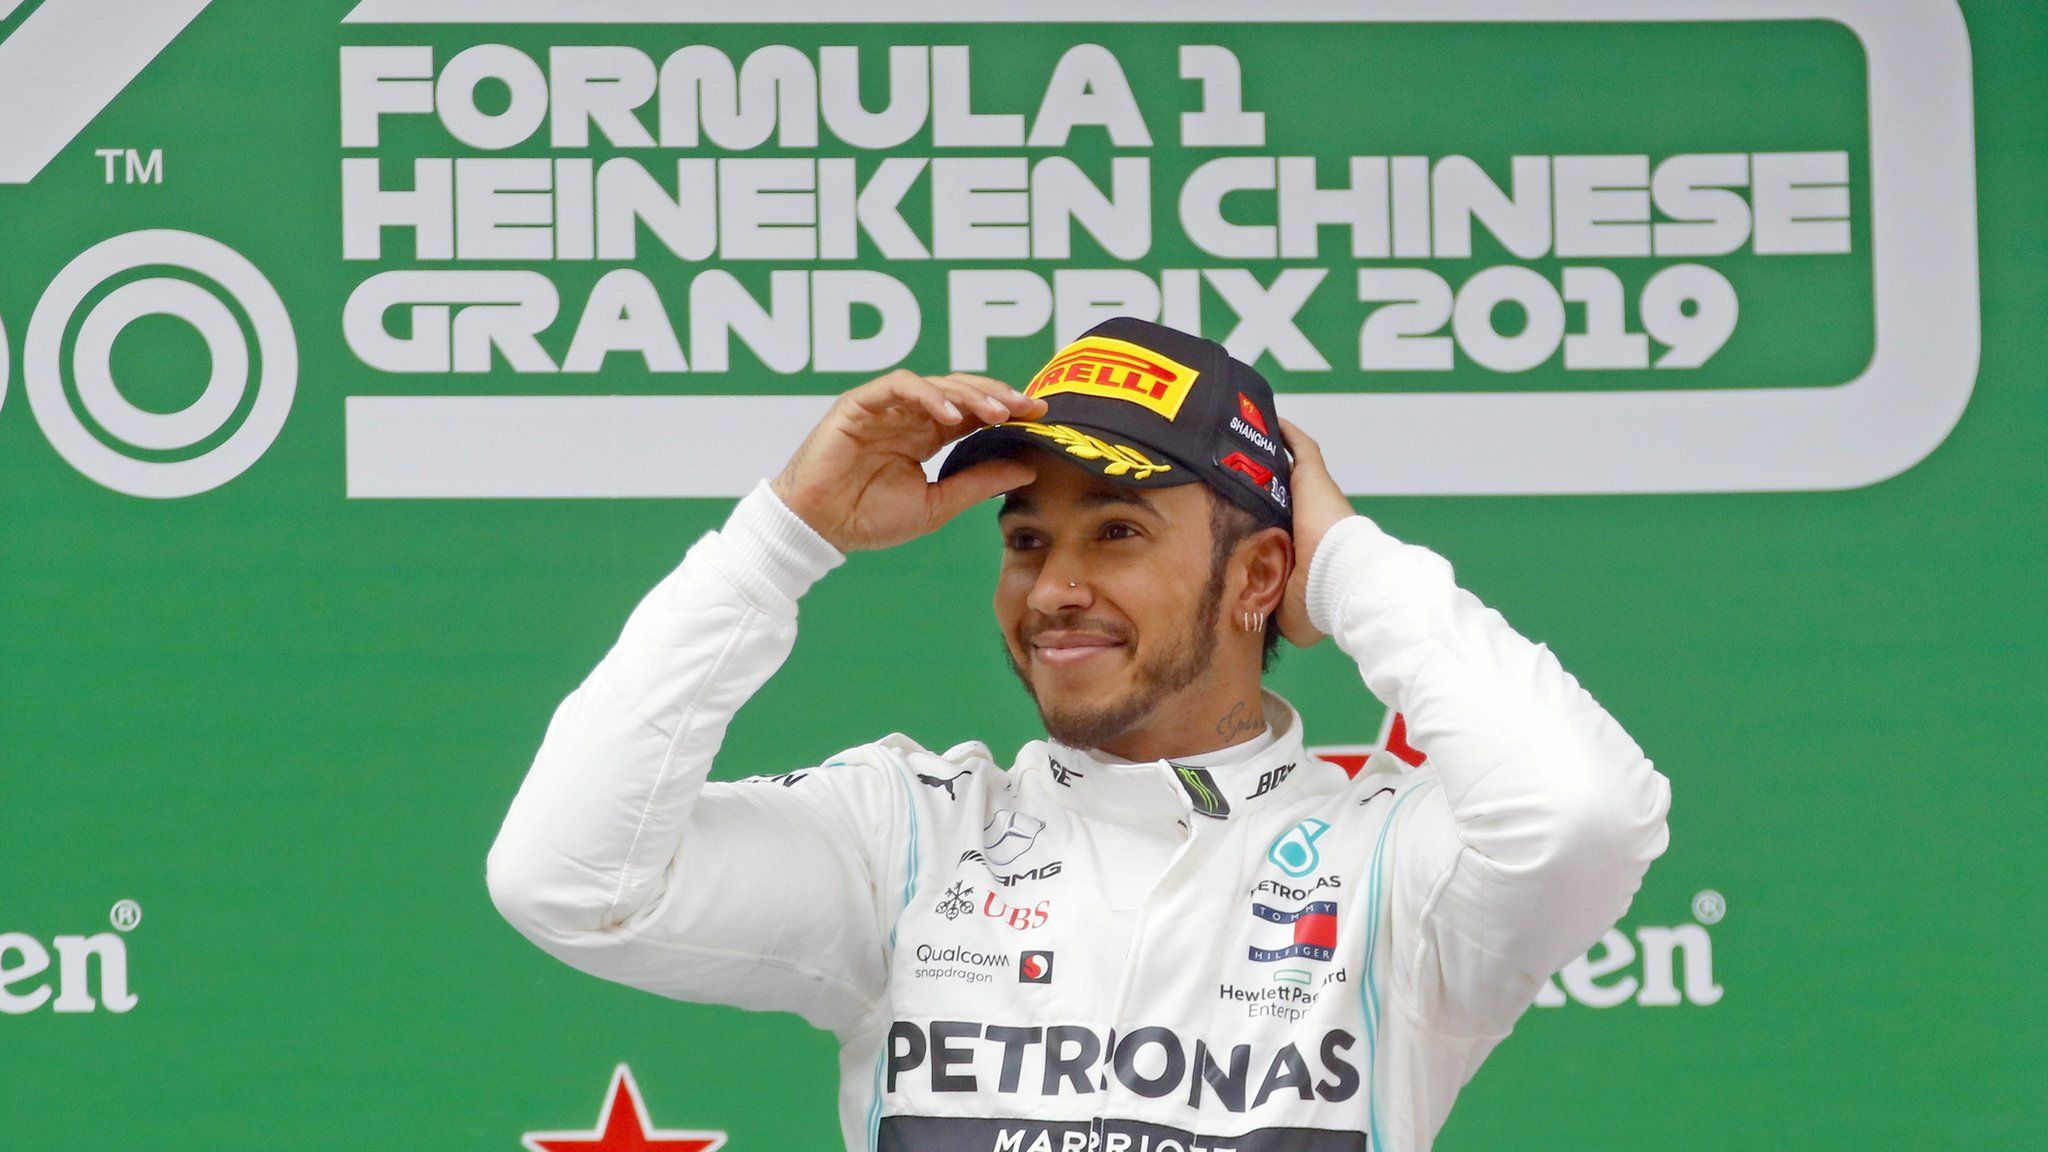 Lewis Hamilton on the podium after winning the 2019 Chinese Grand Prix in Shanghai